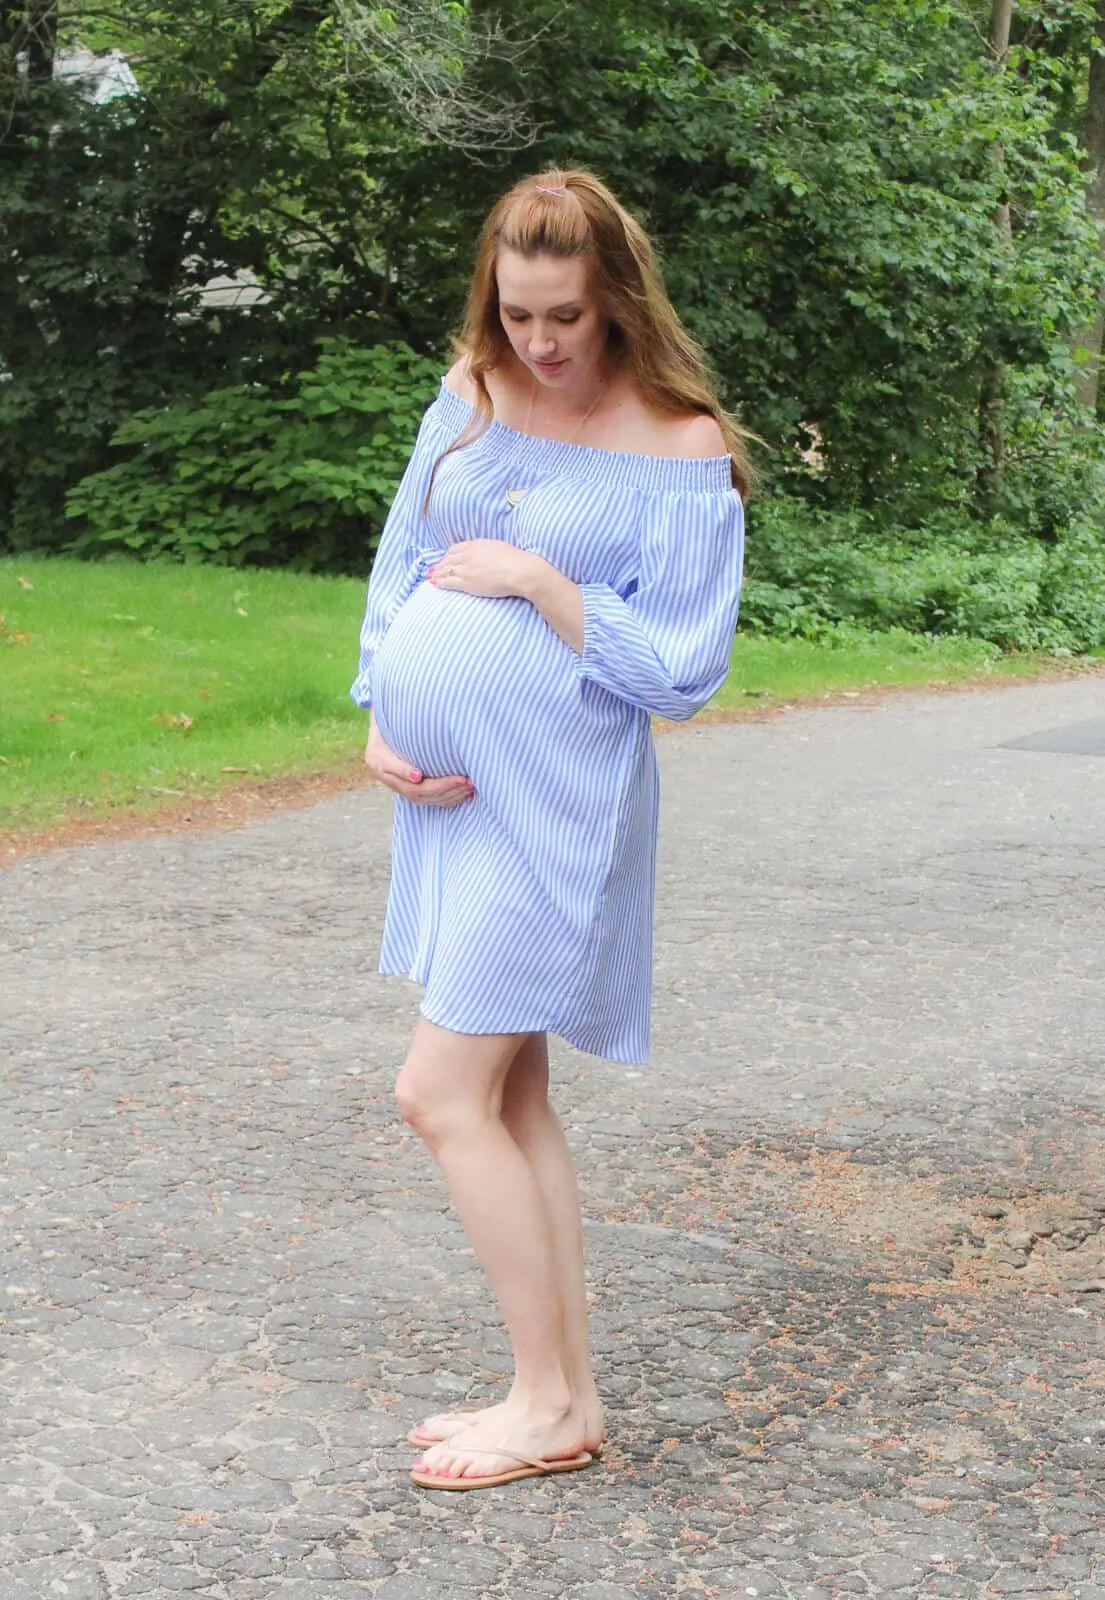 Pregnant woman cradles belly in off the shoulder summer dress.